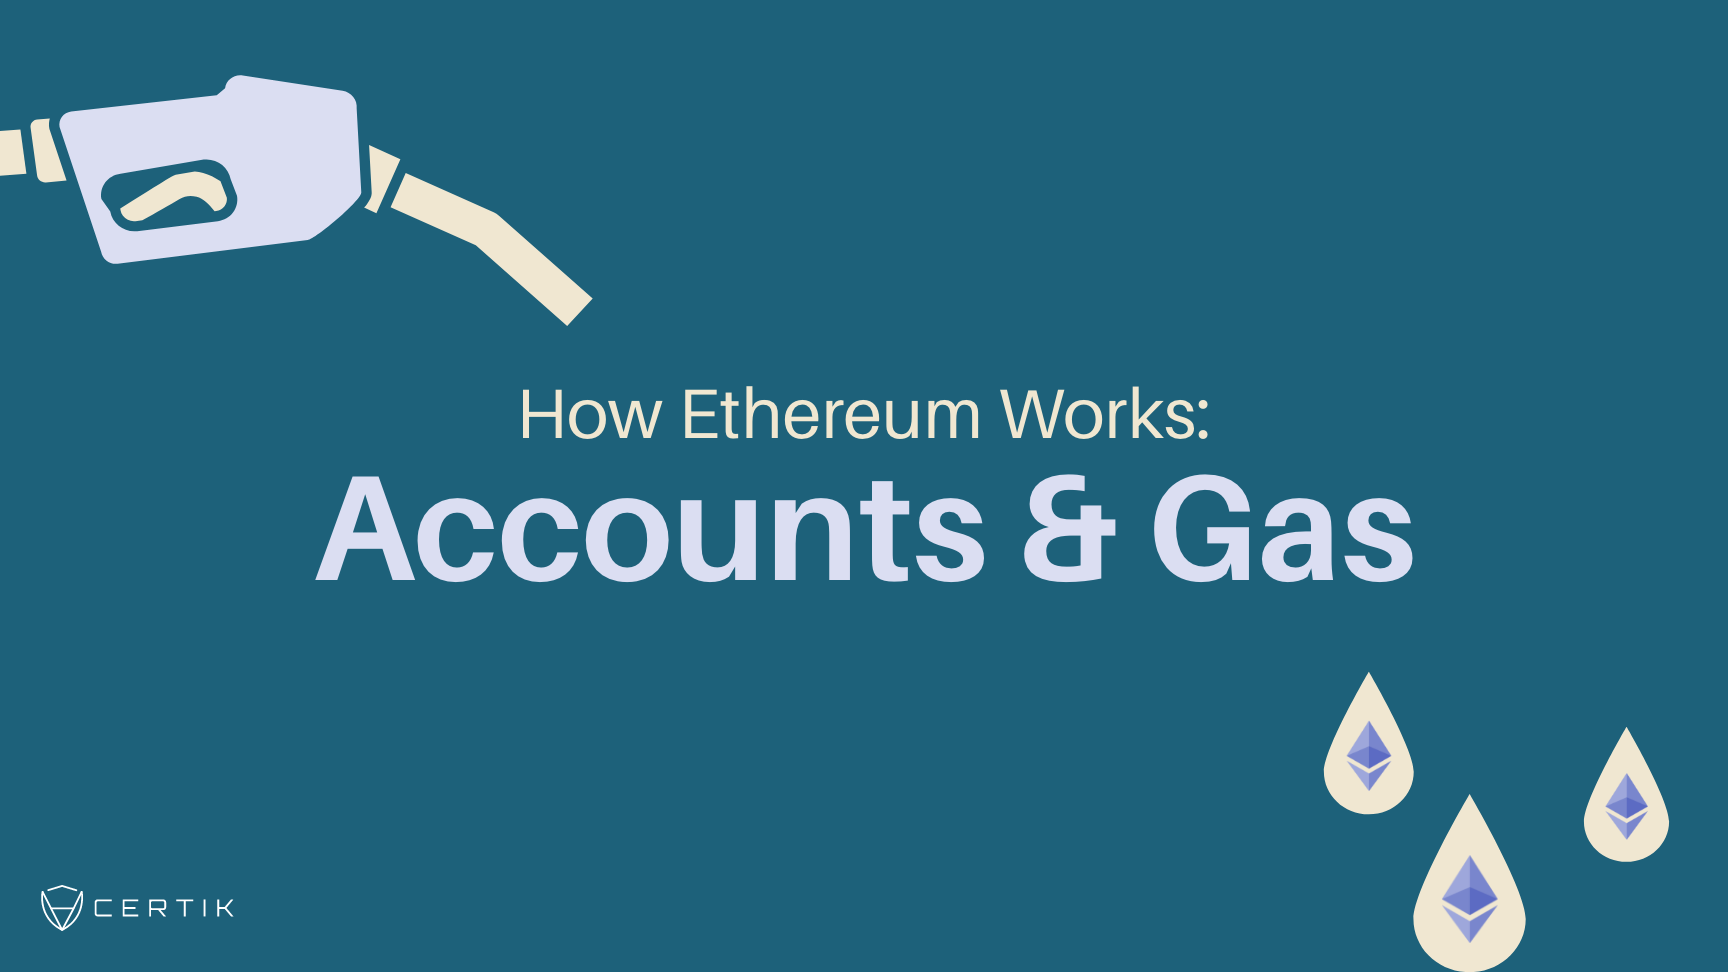 How Ethereum Works: Accounts & Gas